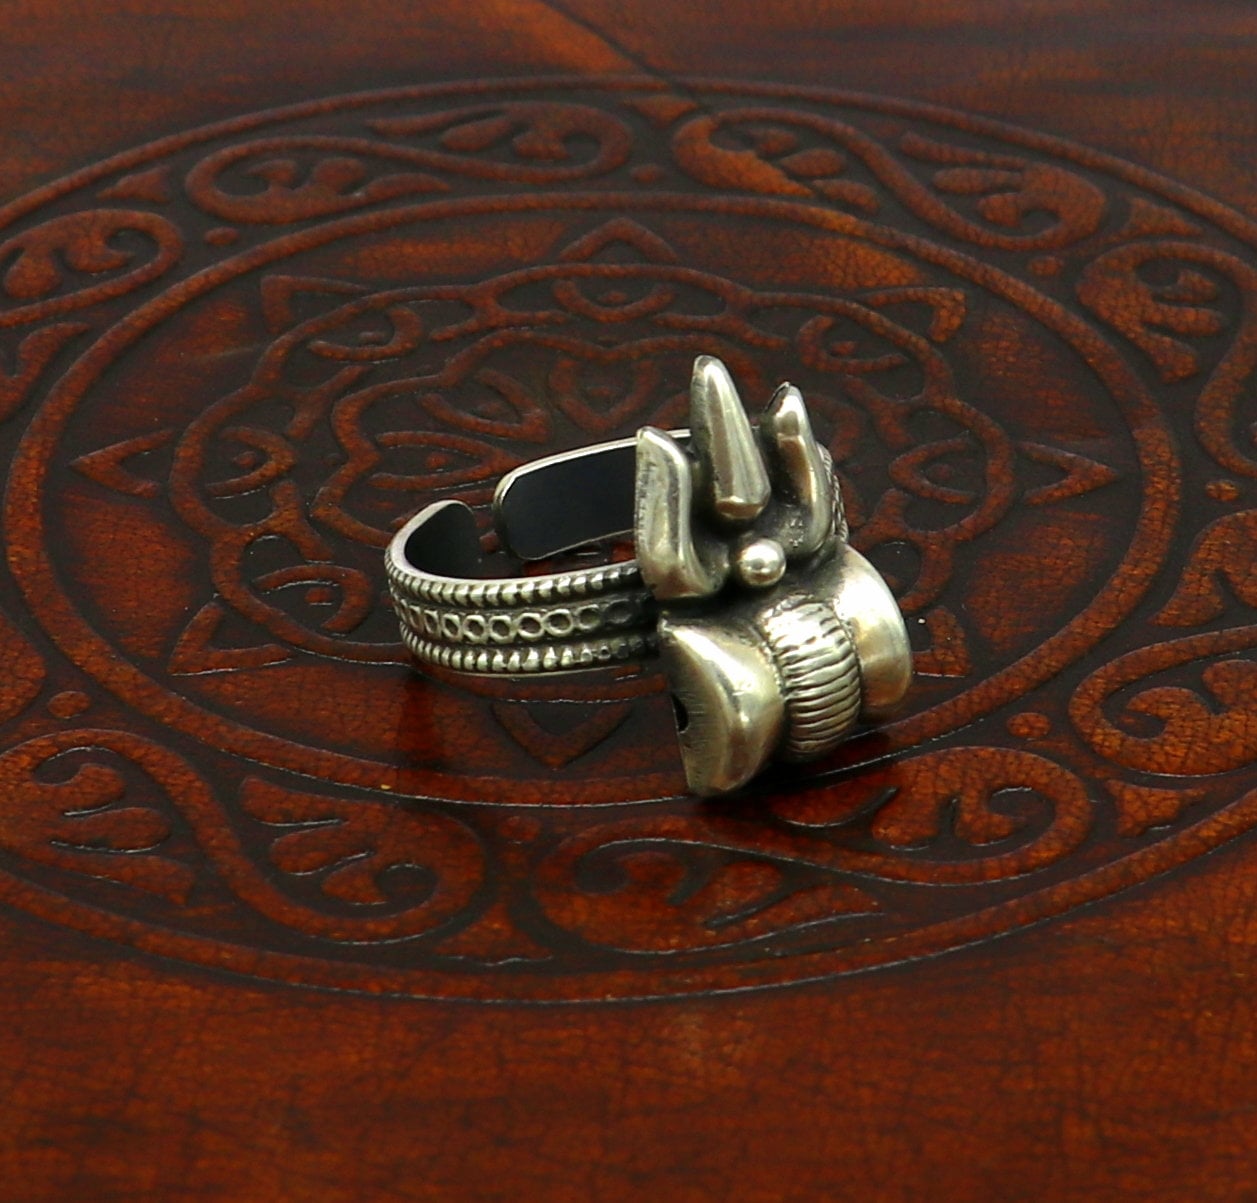 Shiva-Themed Sterling Silver Wrap Ring from India - Powerful Shiva | NOVICA